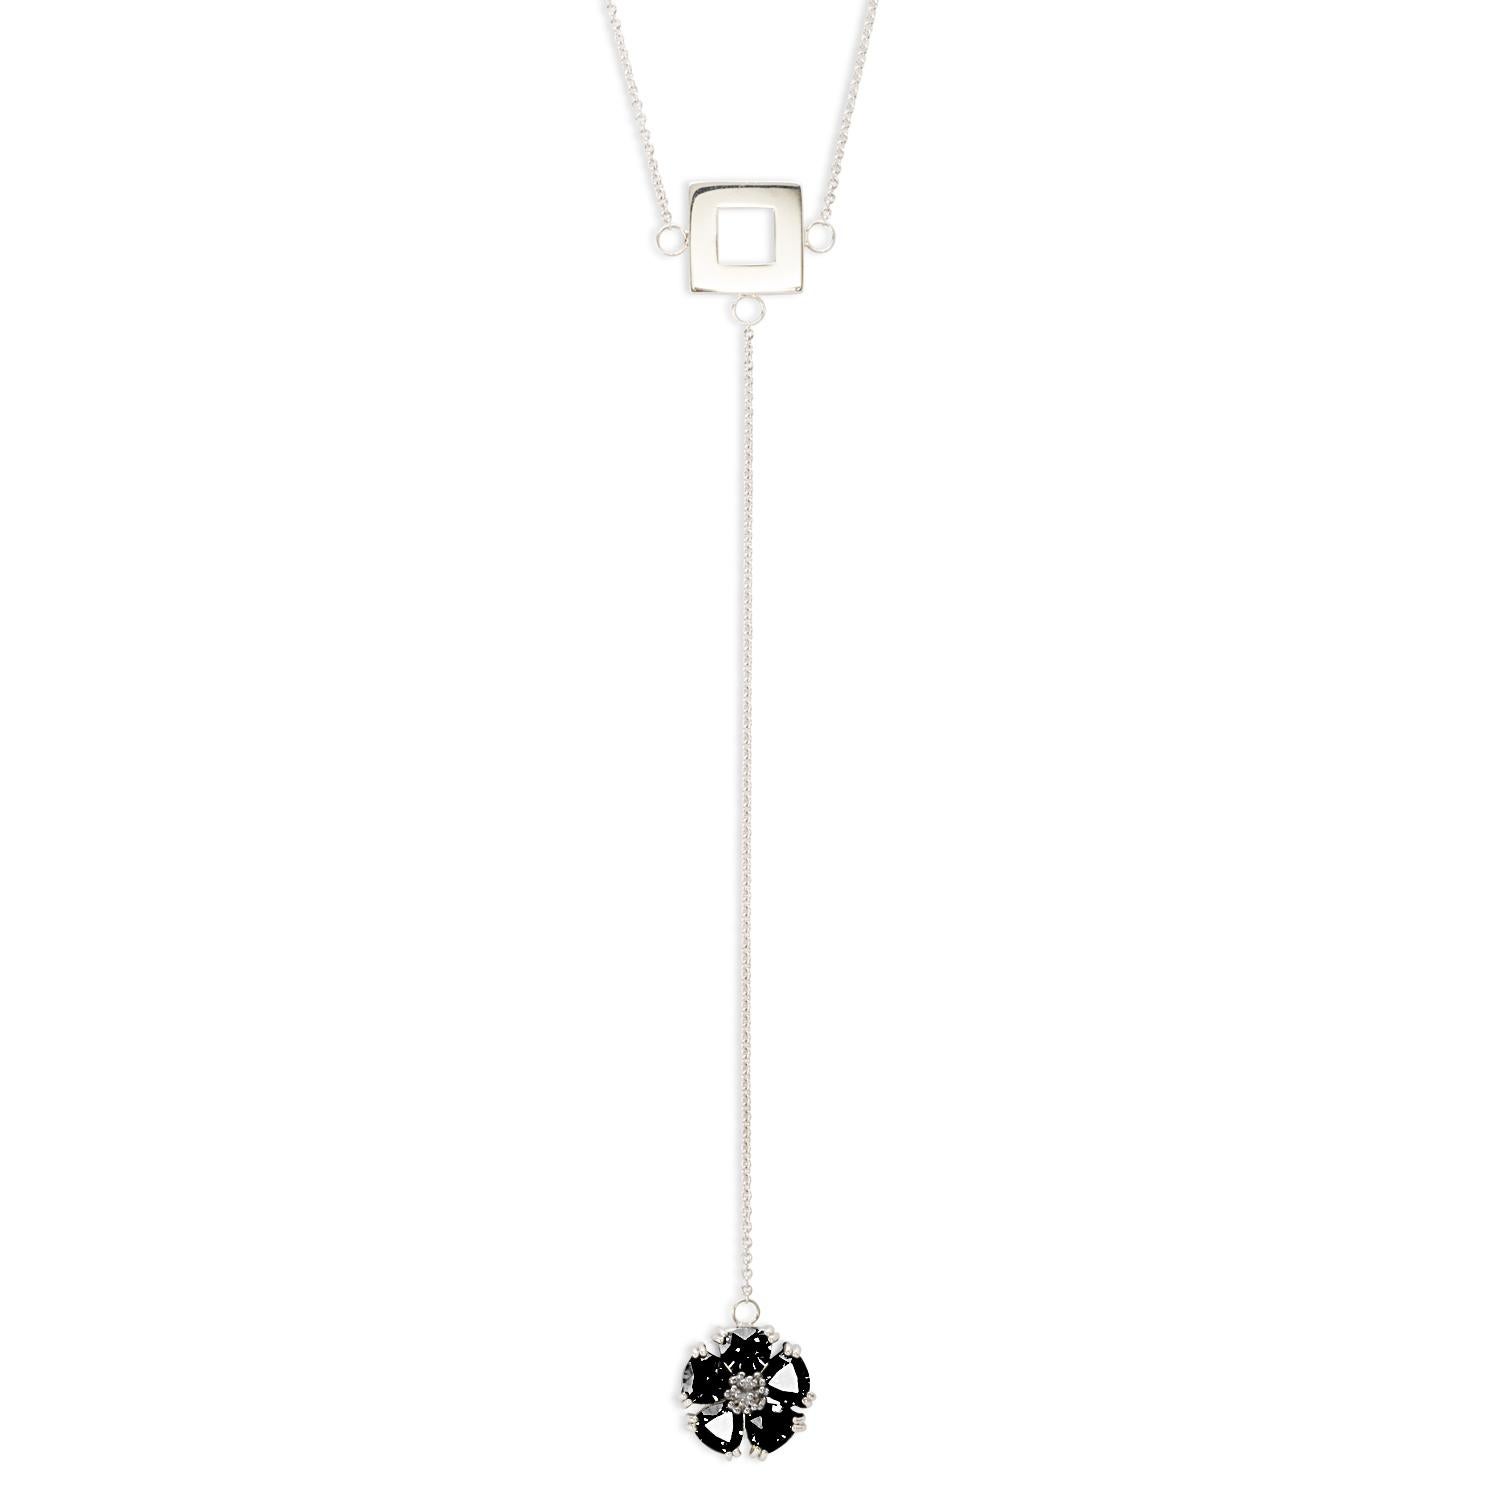 Designed in NYC

.925 Sterling Silver 5 x 7 mm White Topaz Blossom Stone and Square Lariat Necklace. No matter the season, allow natural beauty to surround you wherever you go. Blossom stone and square lariat necklace: 

Sterling silver 
High-polish